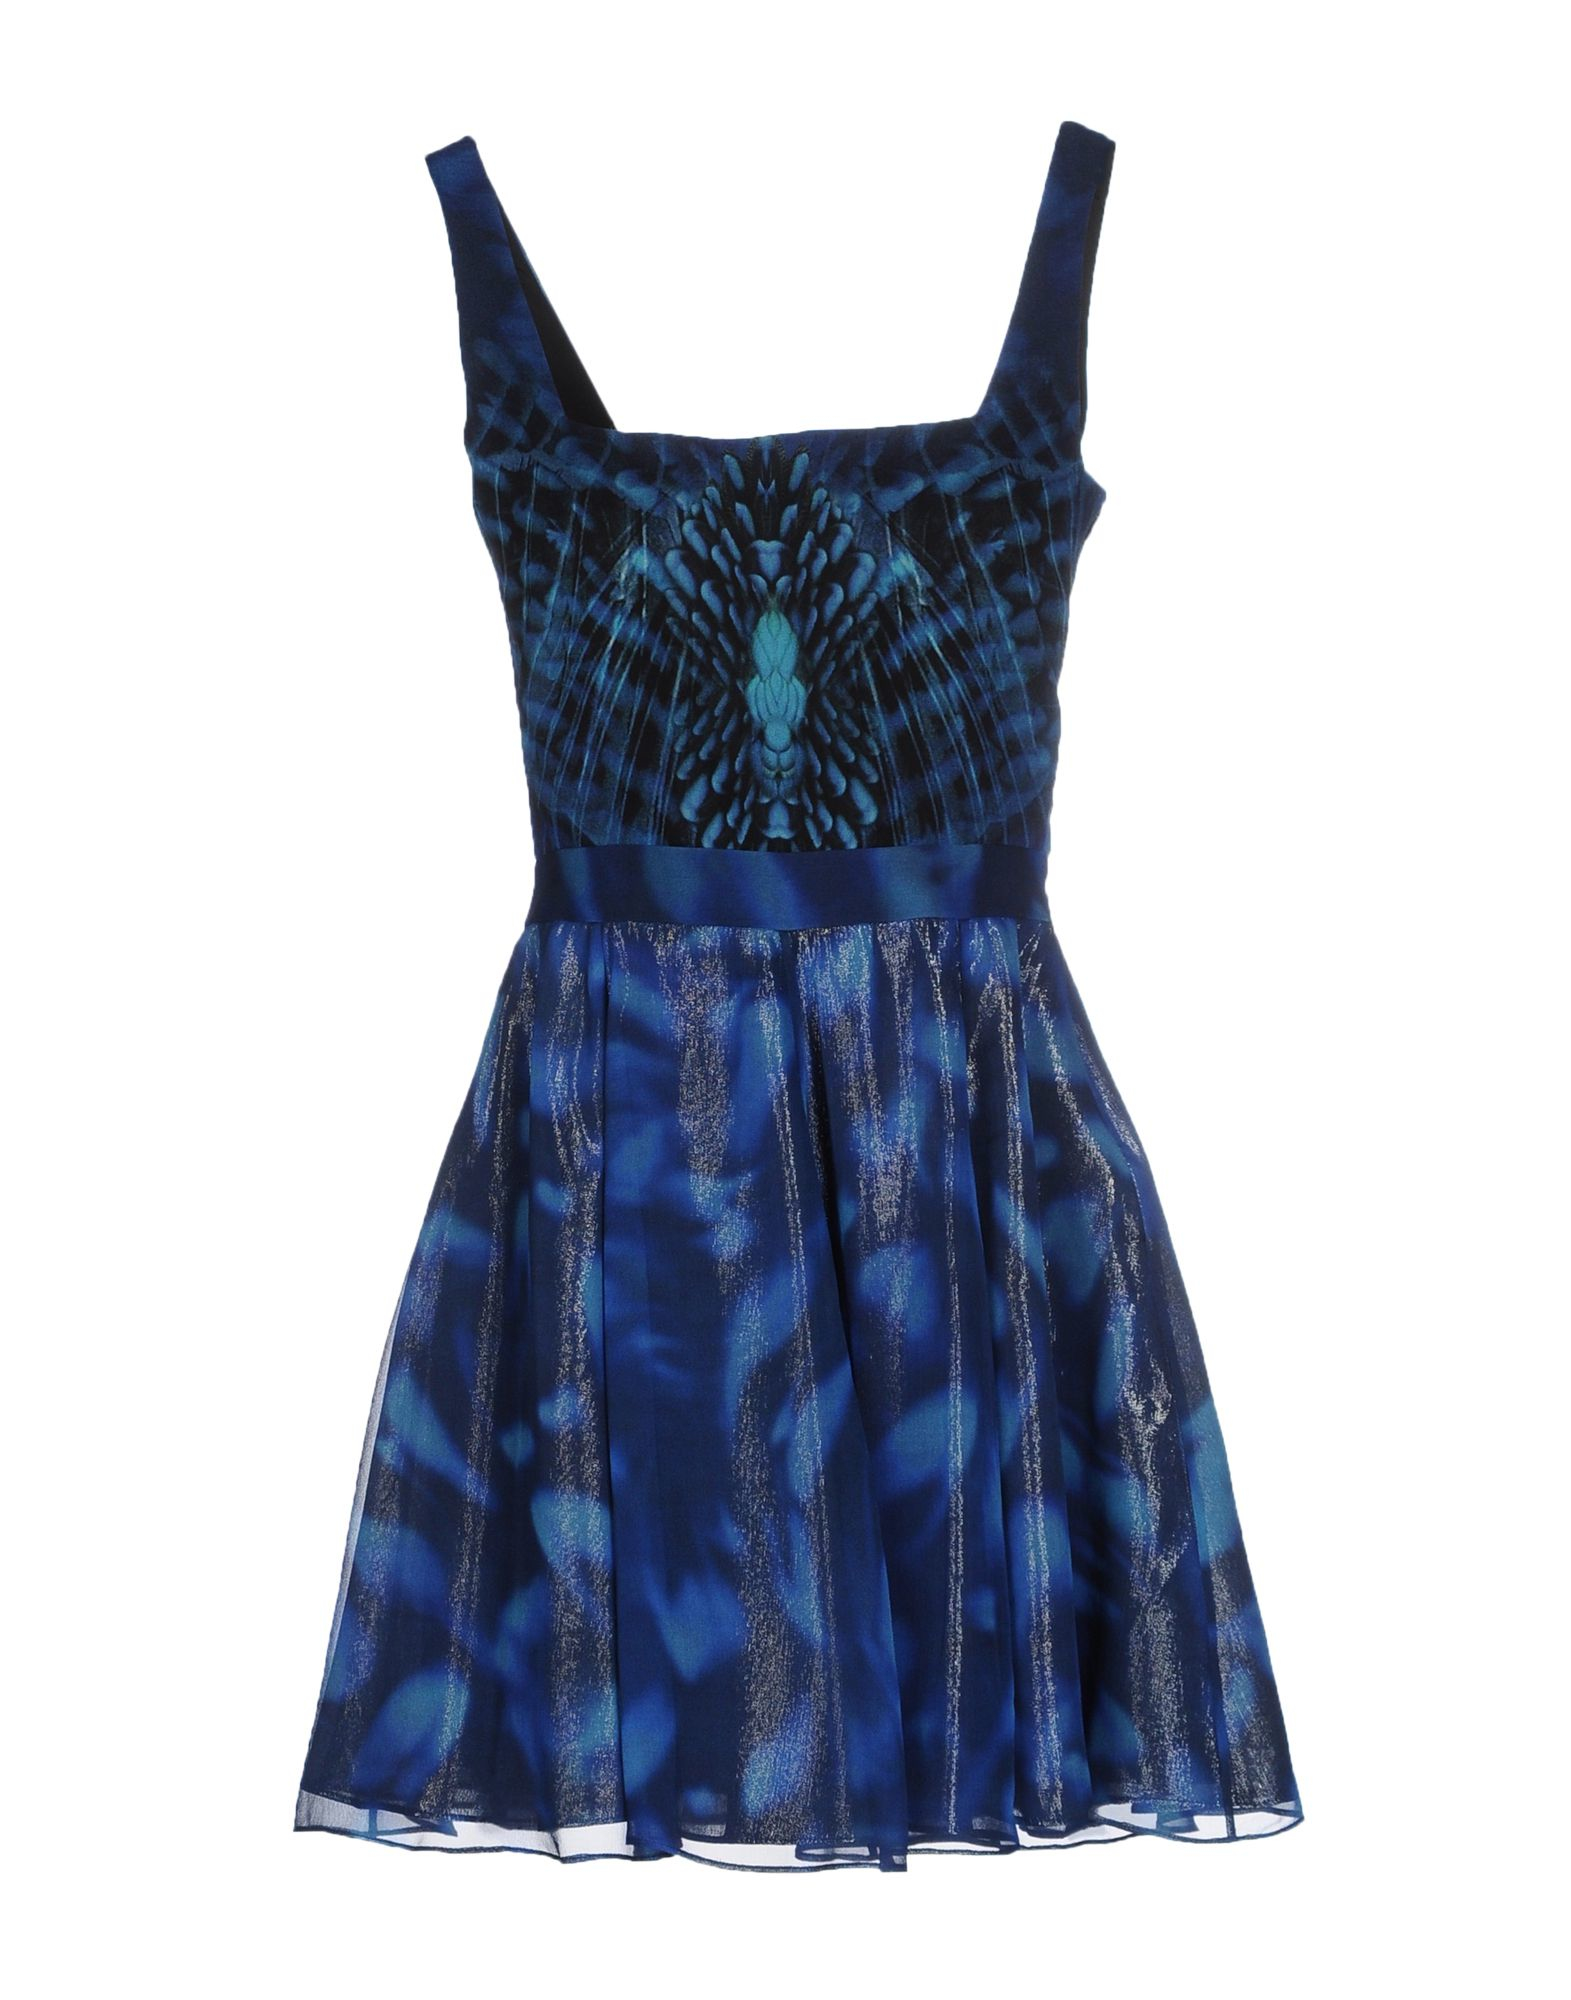 Capitol Couture By Trish Summerville Chiffon Short Dress in Blue - Lyst